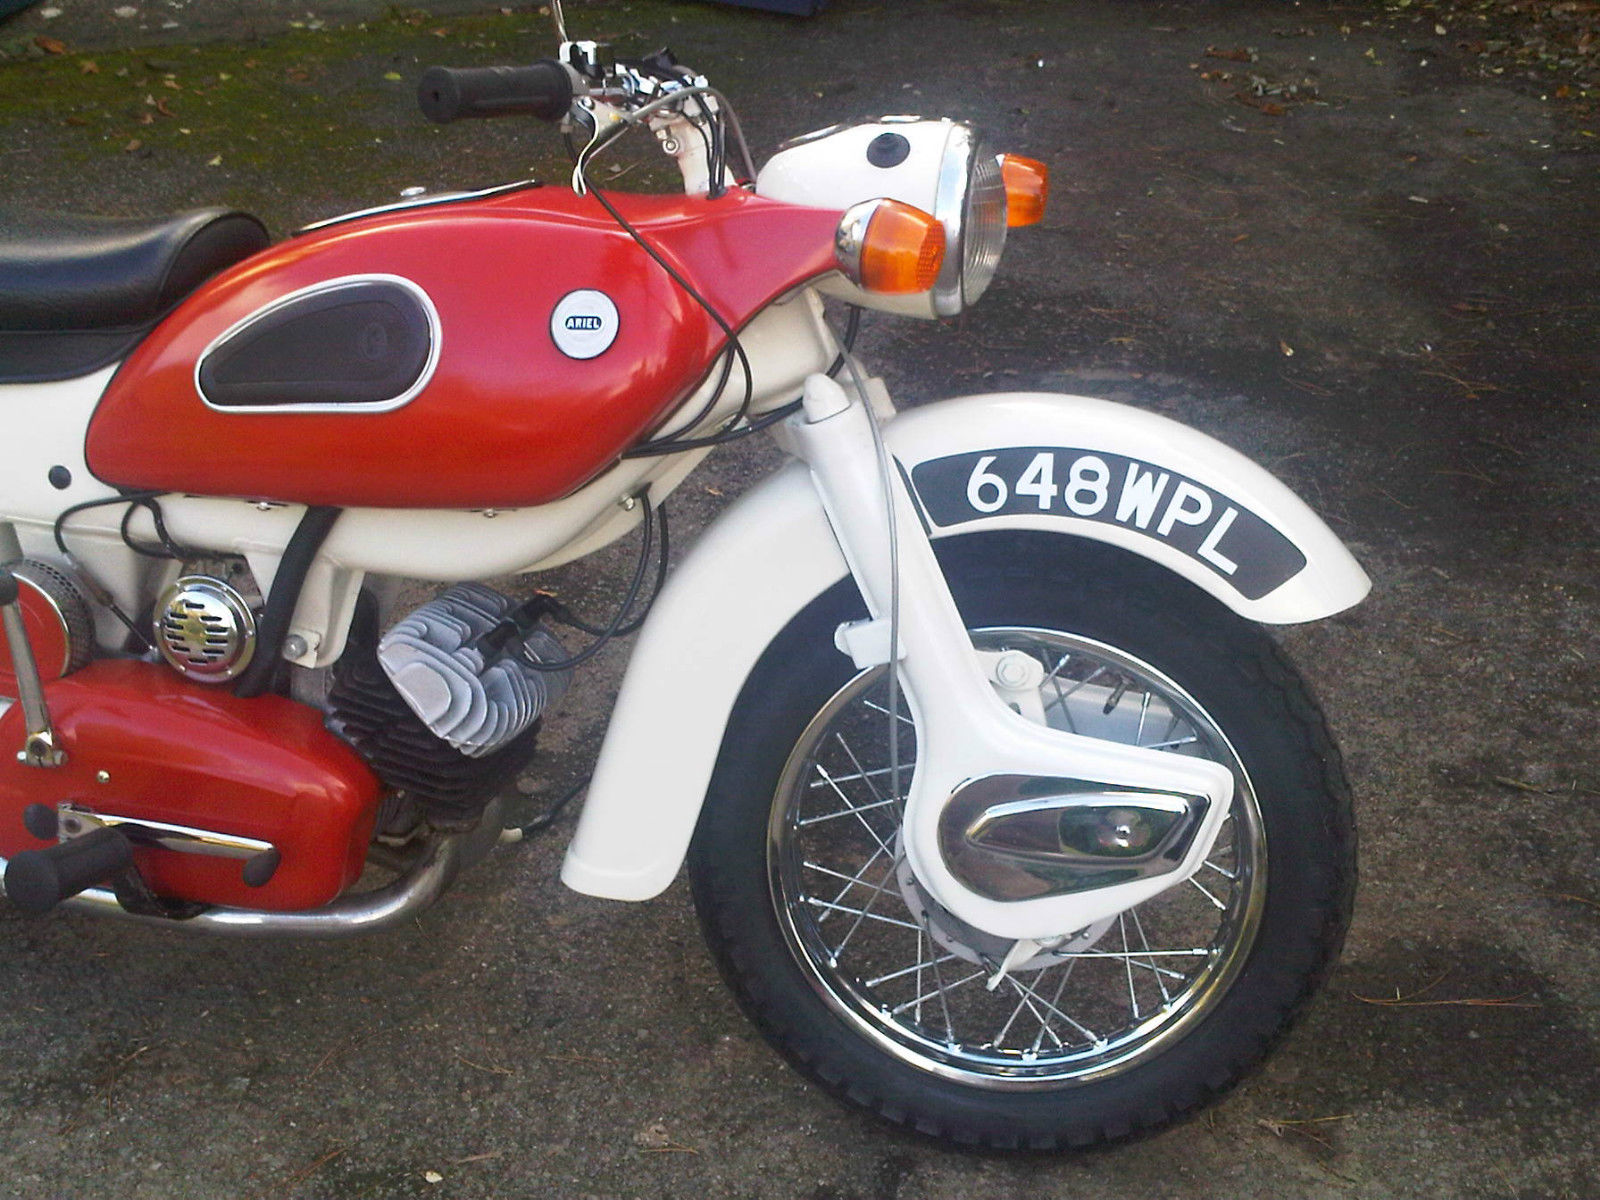 Ariel Arrow - 1962 - Fuel Tank, Motor and Transmission, Font Mudguard and Front Wheel.